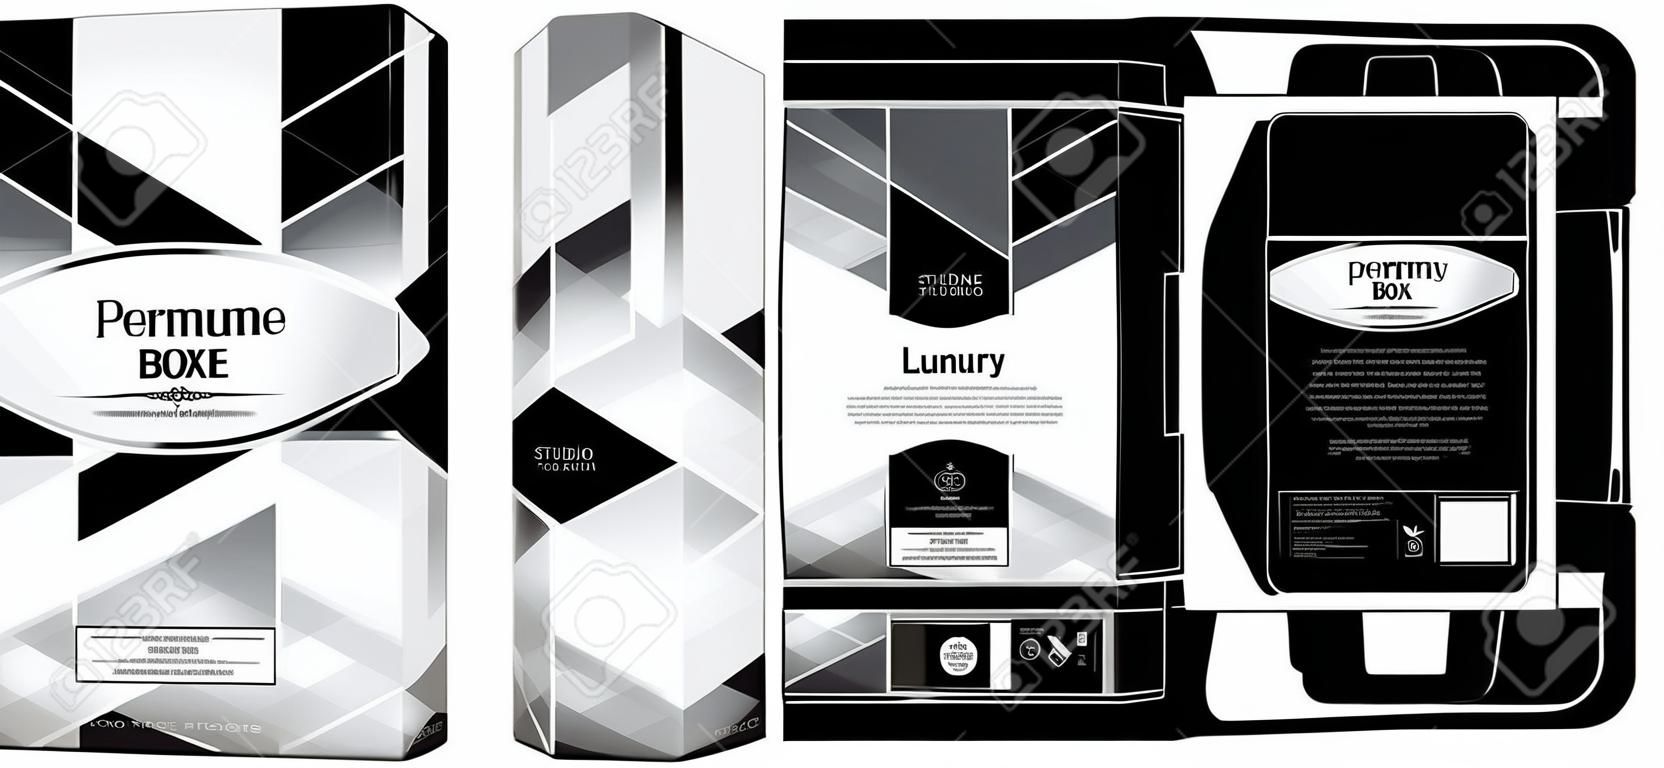 Packaging design, perfume luxury box design template and mockup box. Illustration vector.